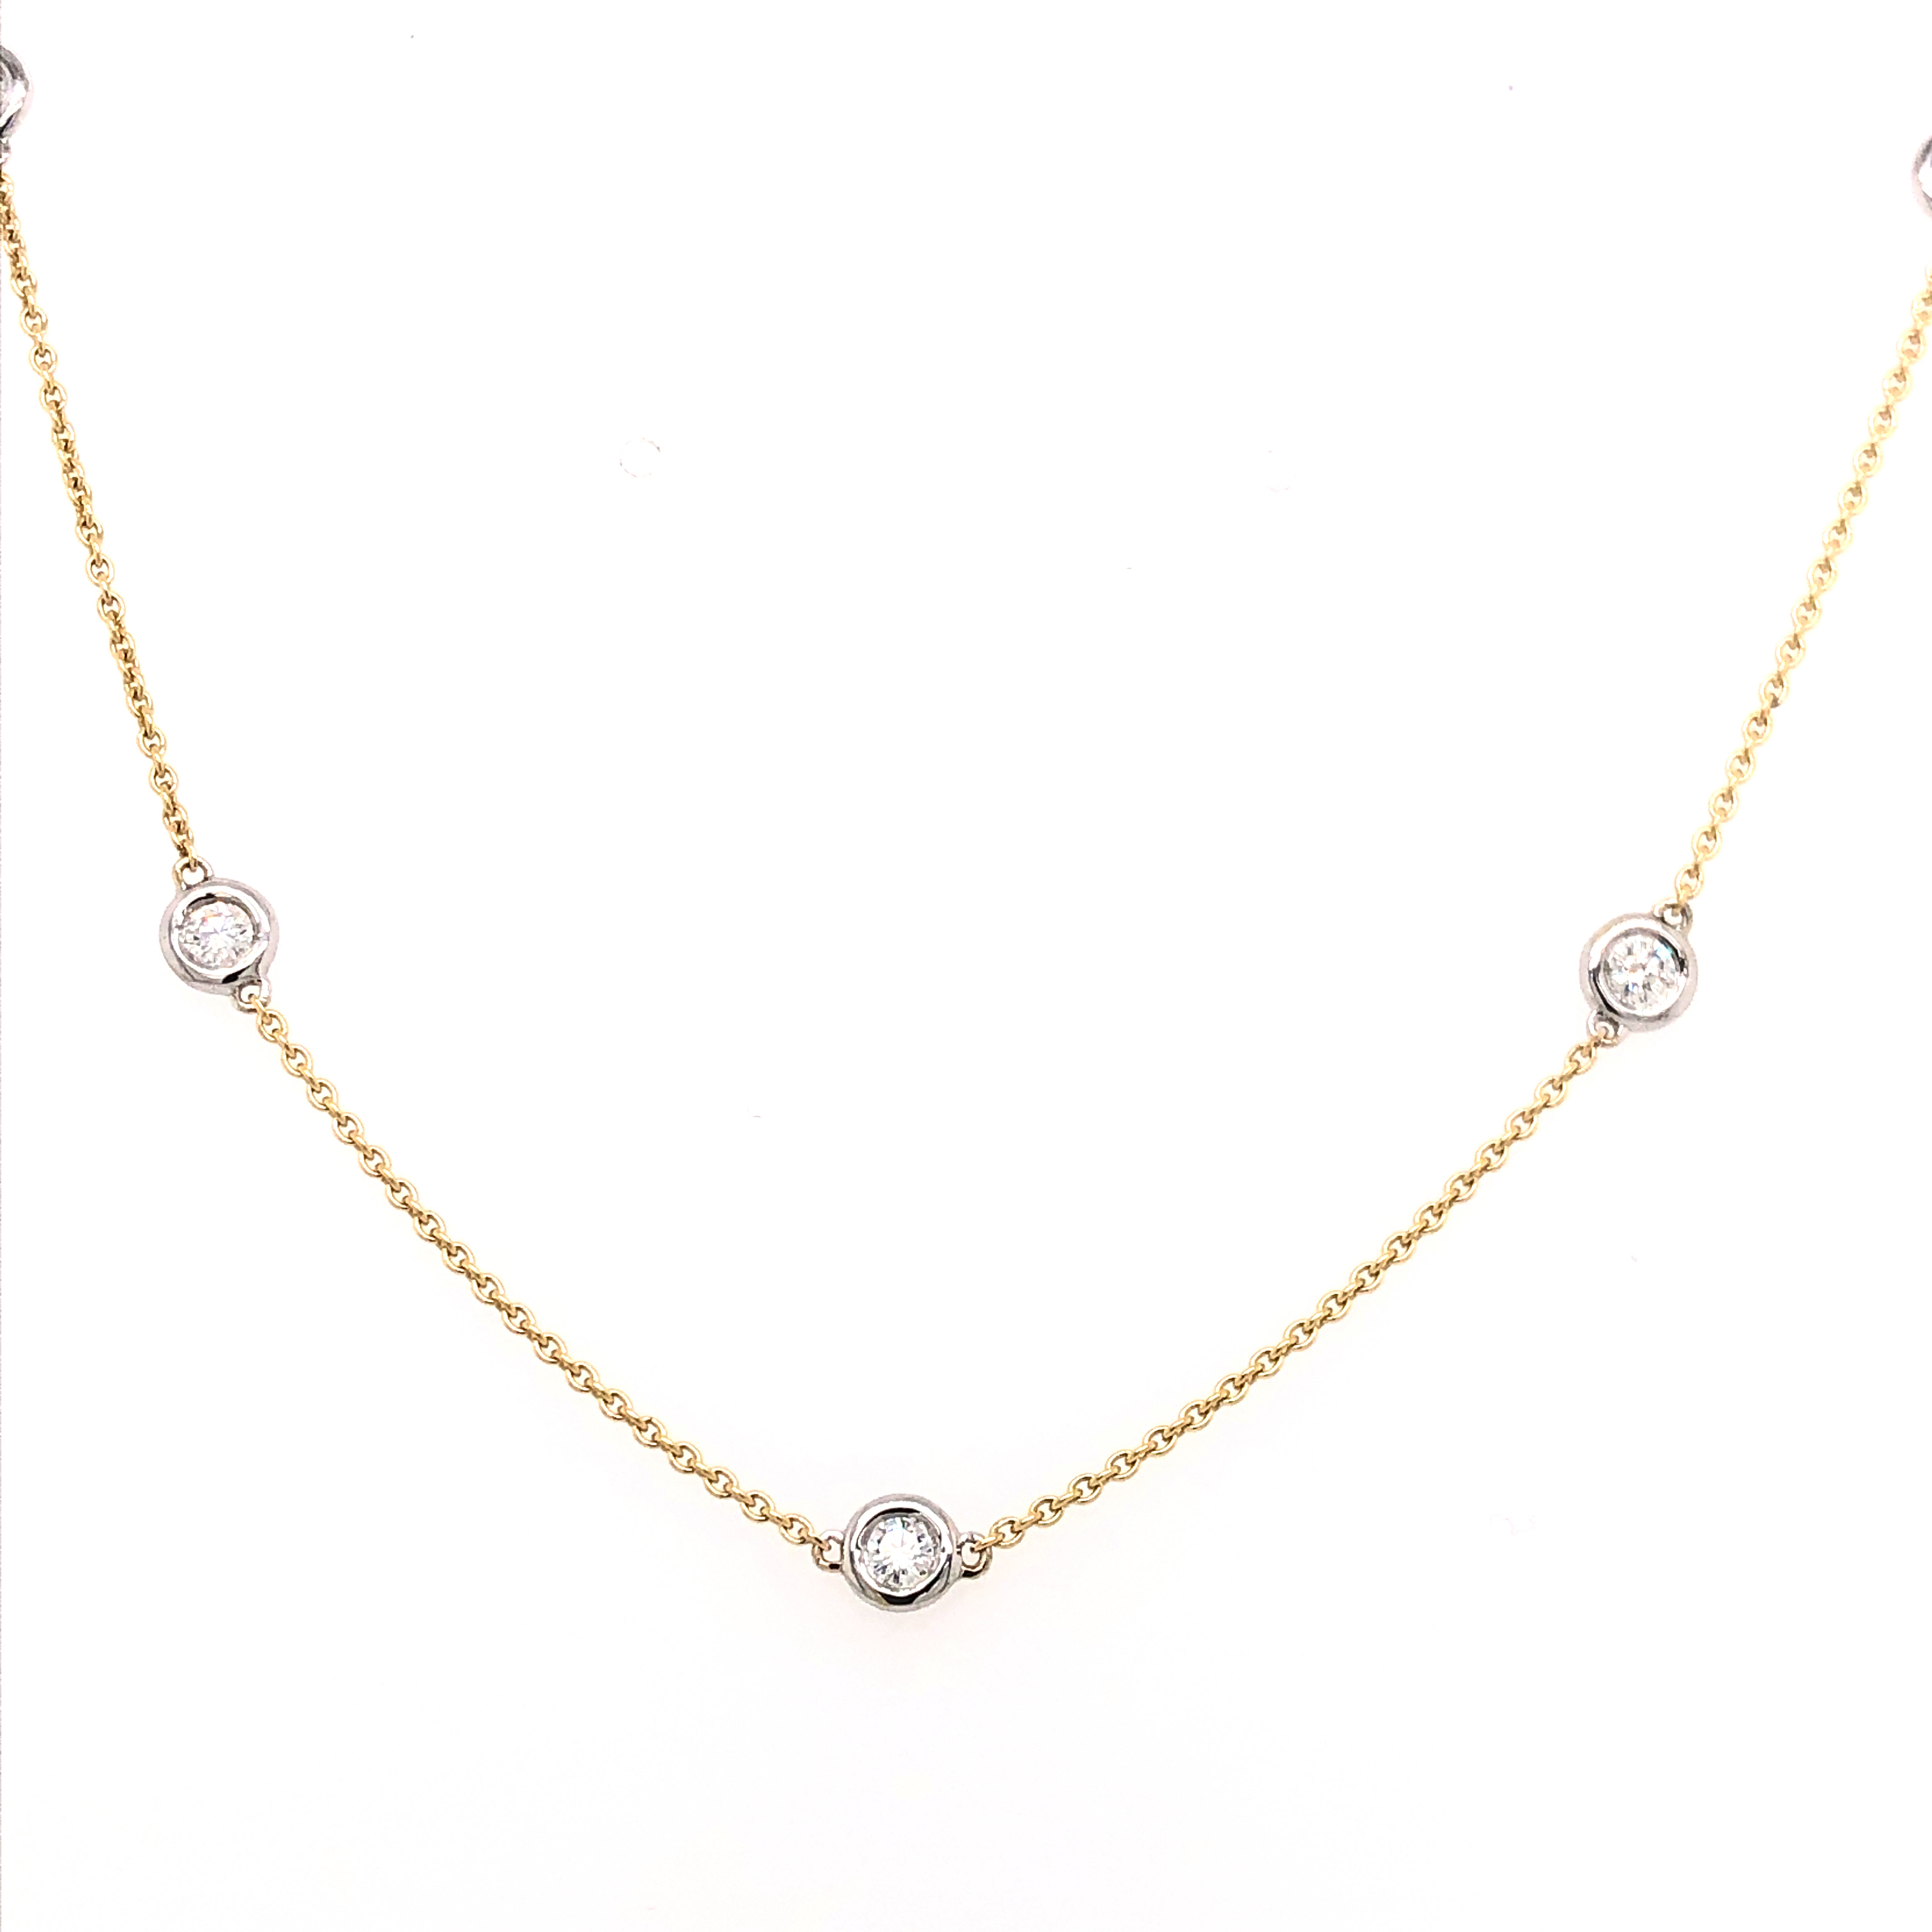 14 Karat yellow gold diamonds by the yard necklace Length 19" with 5=0.30ctw Round Brilliant G SI Diamonds set in white gold.